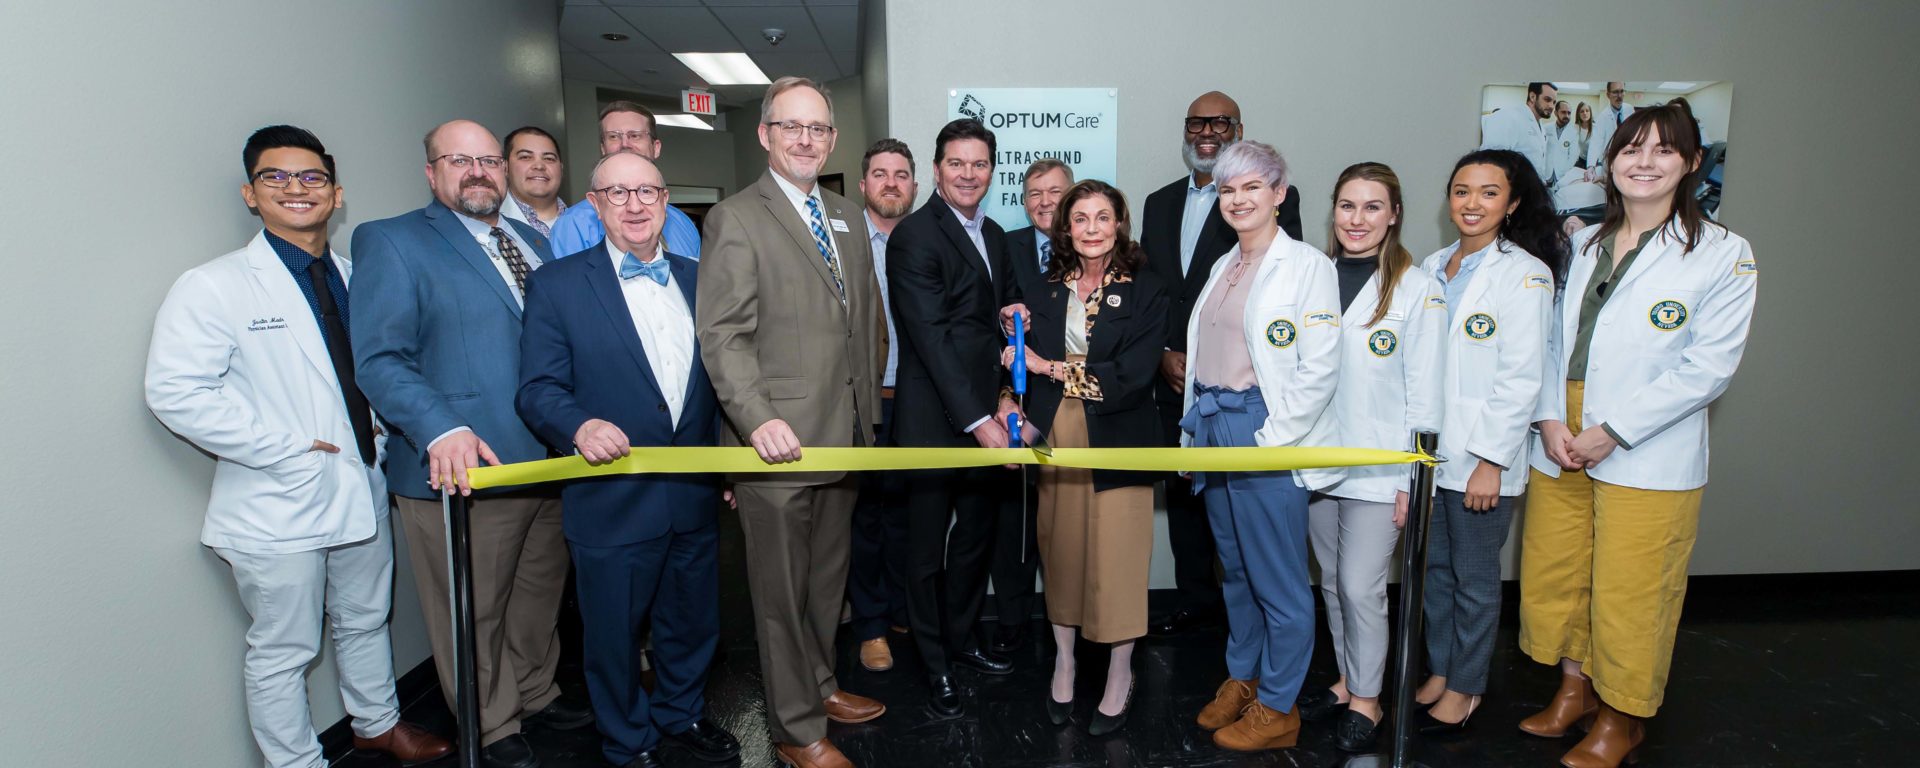  A special ribbon cutting was held to celebrate the center’s grand opening and was attended by the Touro College and University System Leadership, Dr. Robert McBeath, President of OptumCare Nevada, several healthcare professionals and students, and members of the Southern Nevada community.